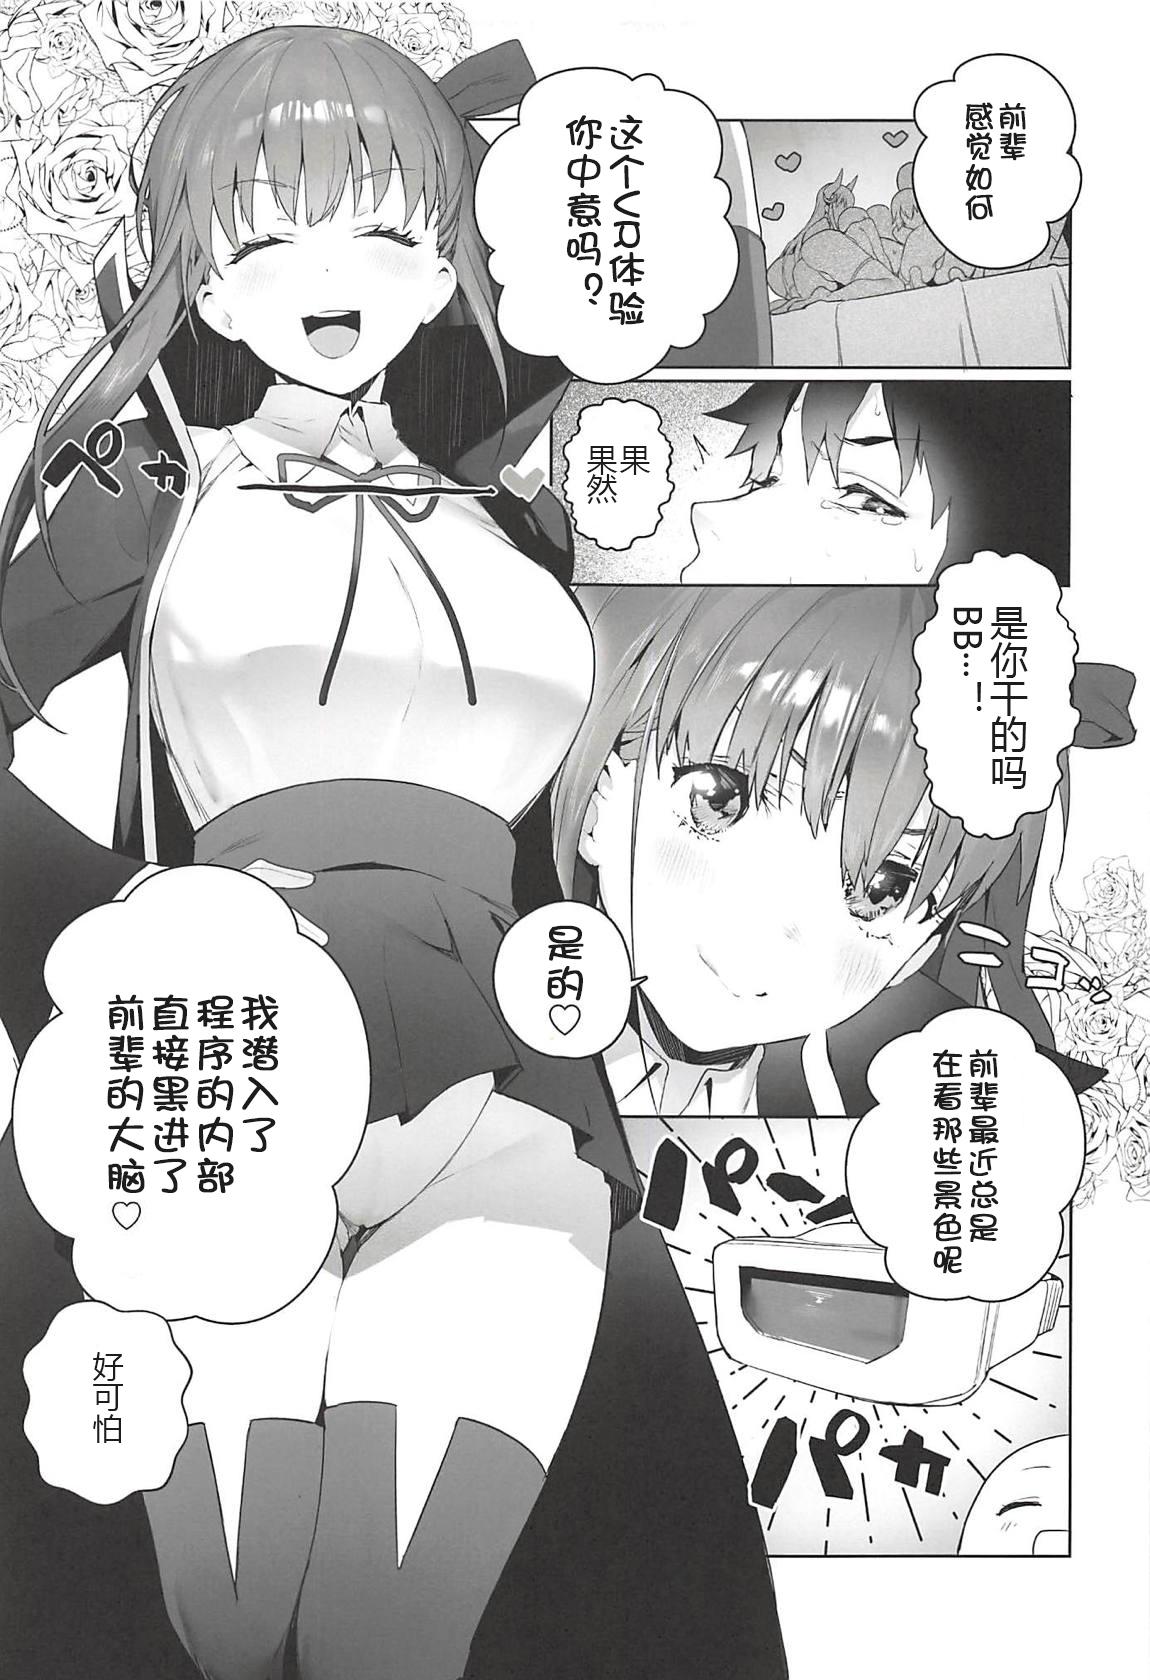 Banging LOVELESS - Fate grand order Anal Fuck - Page 5